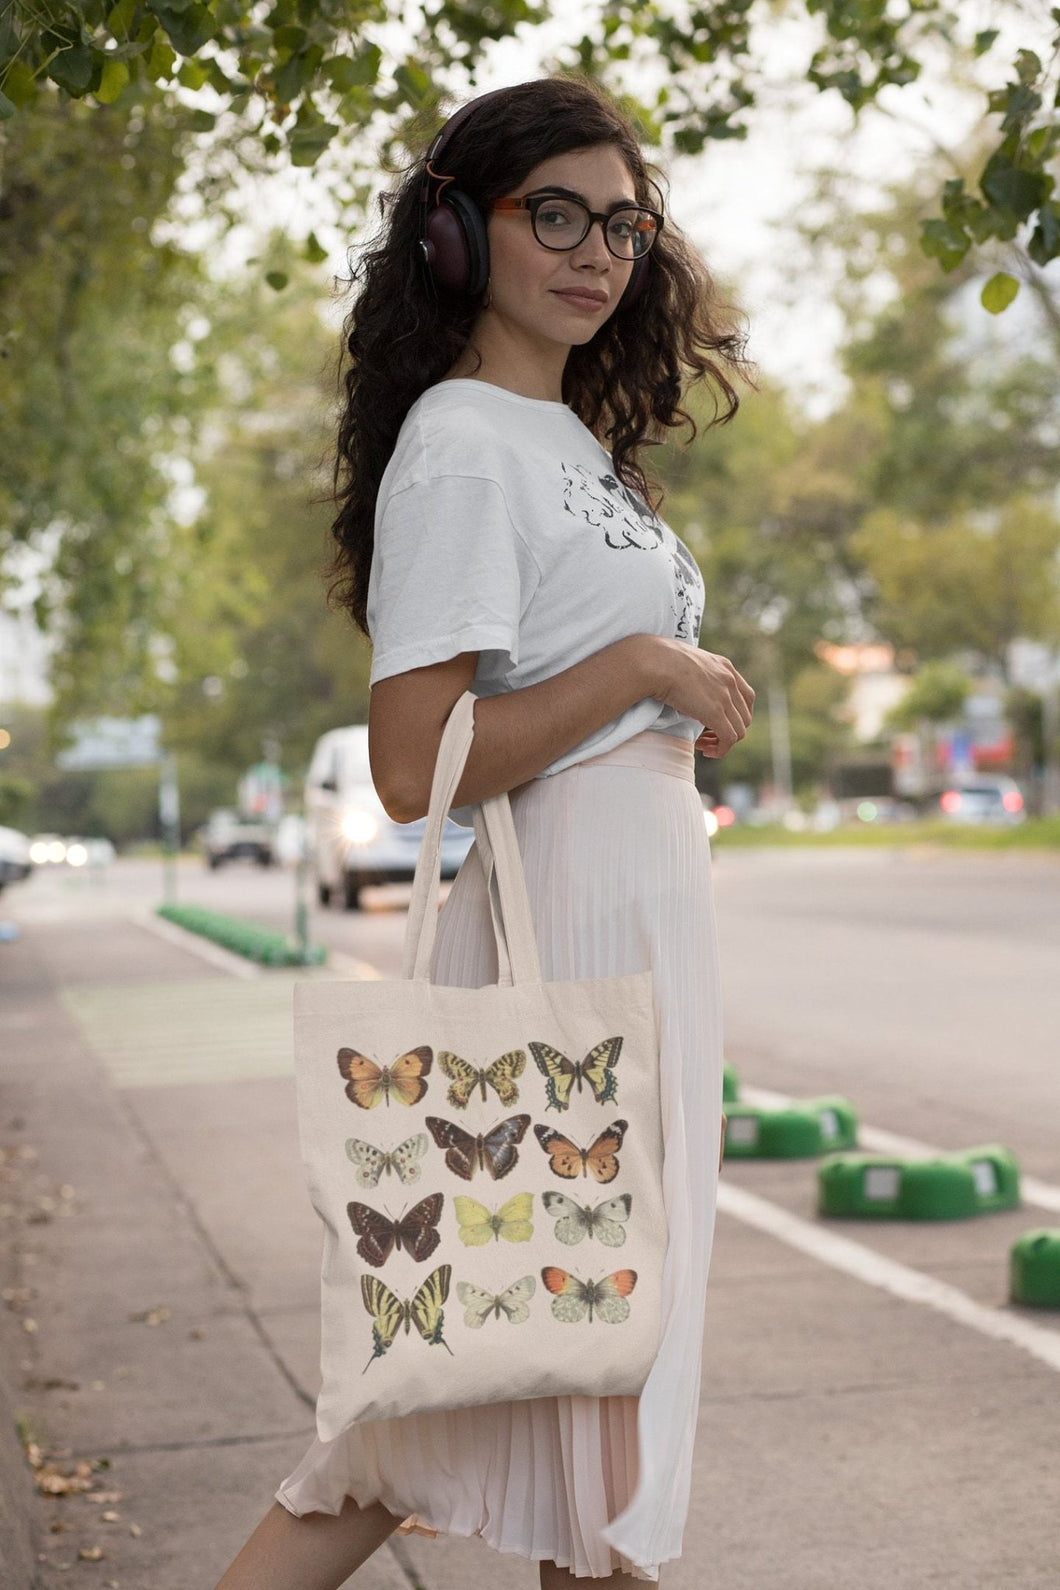 Butterfly Print Tote